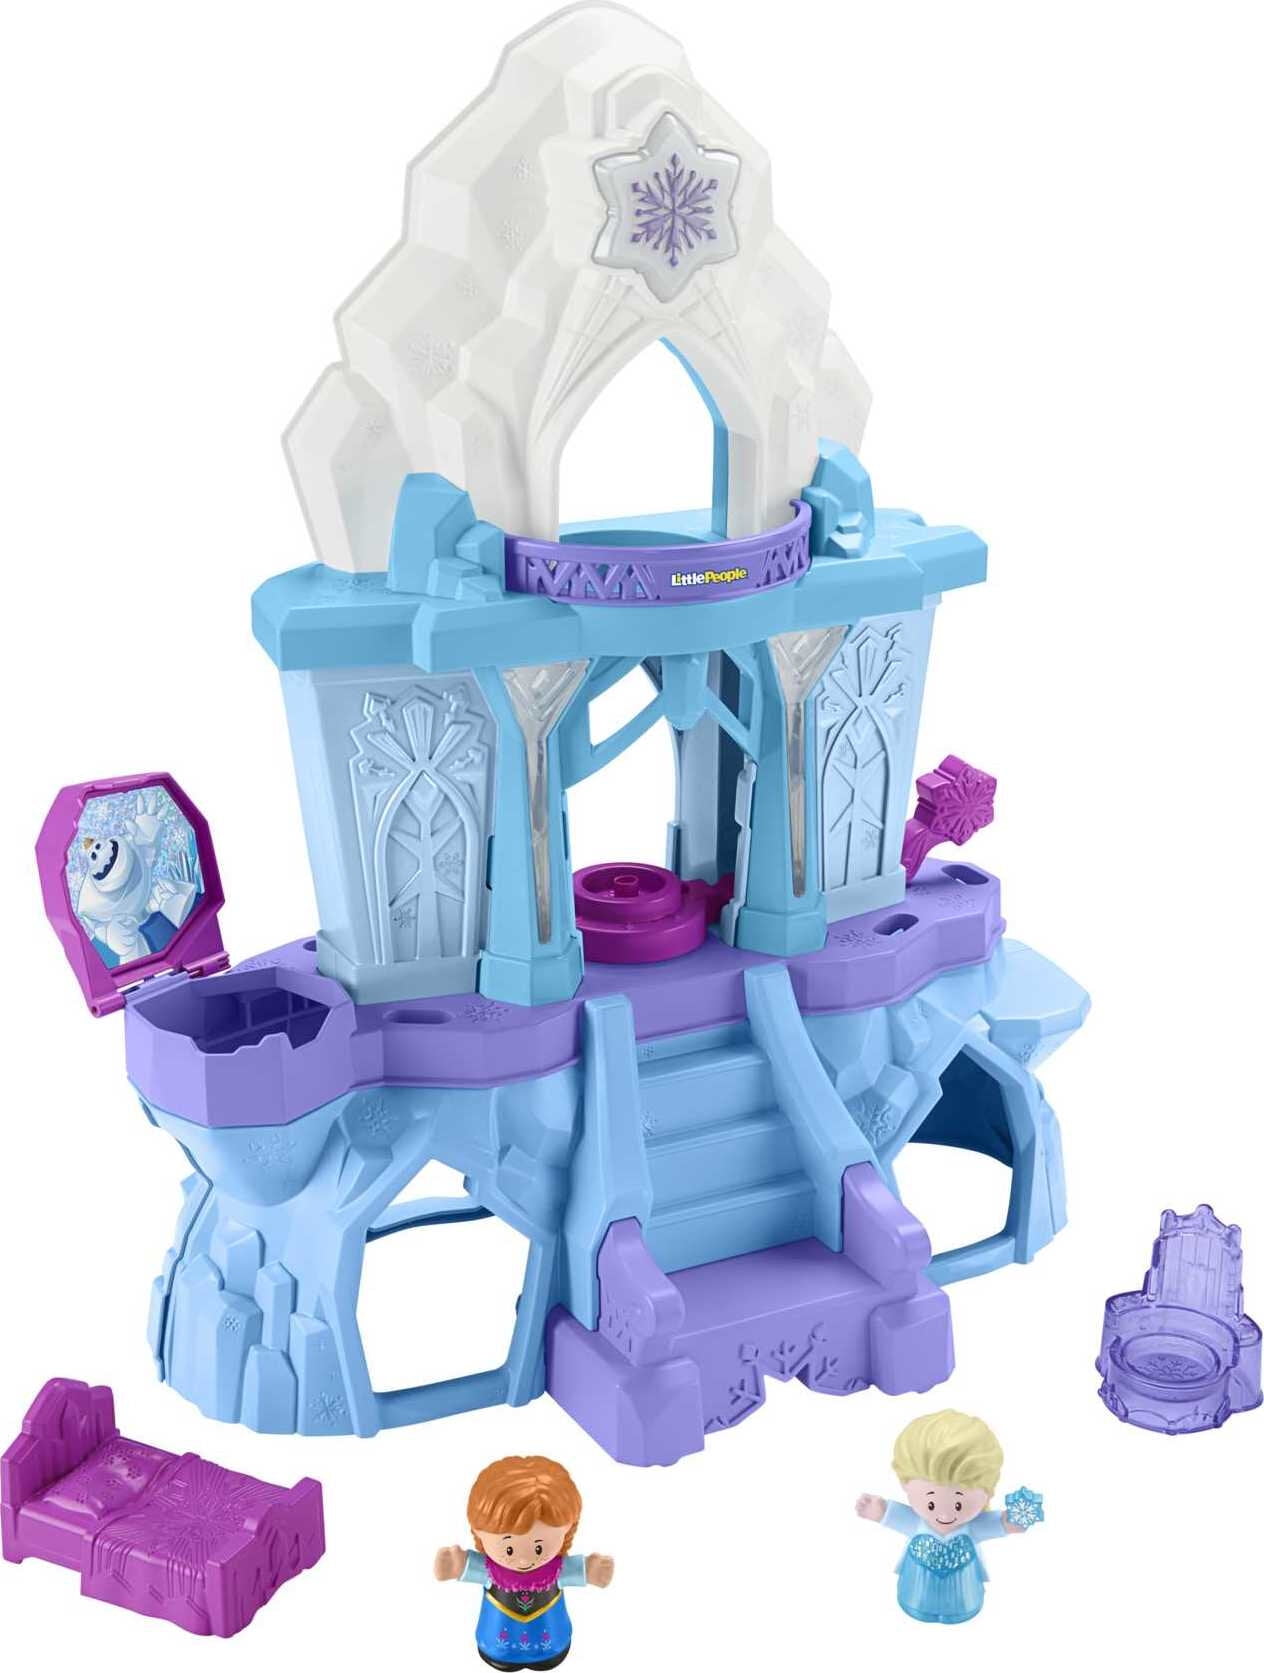 Details about   Fisher Price Little People New Disney Frozen Elsa 